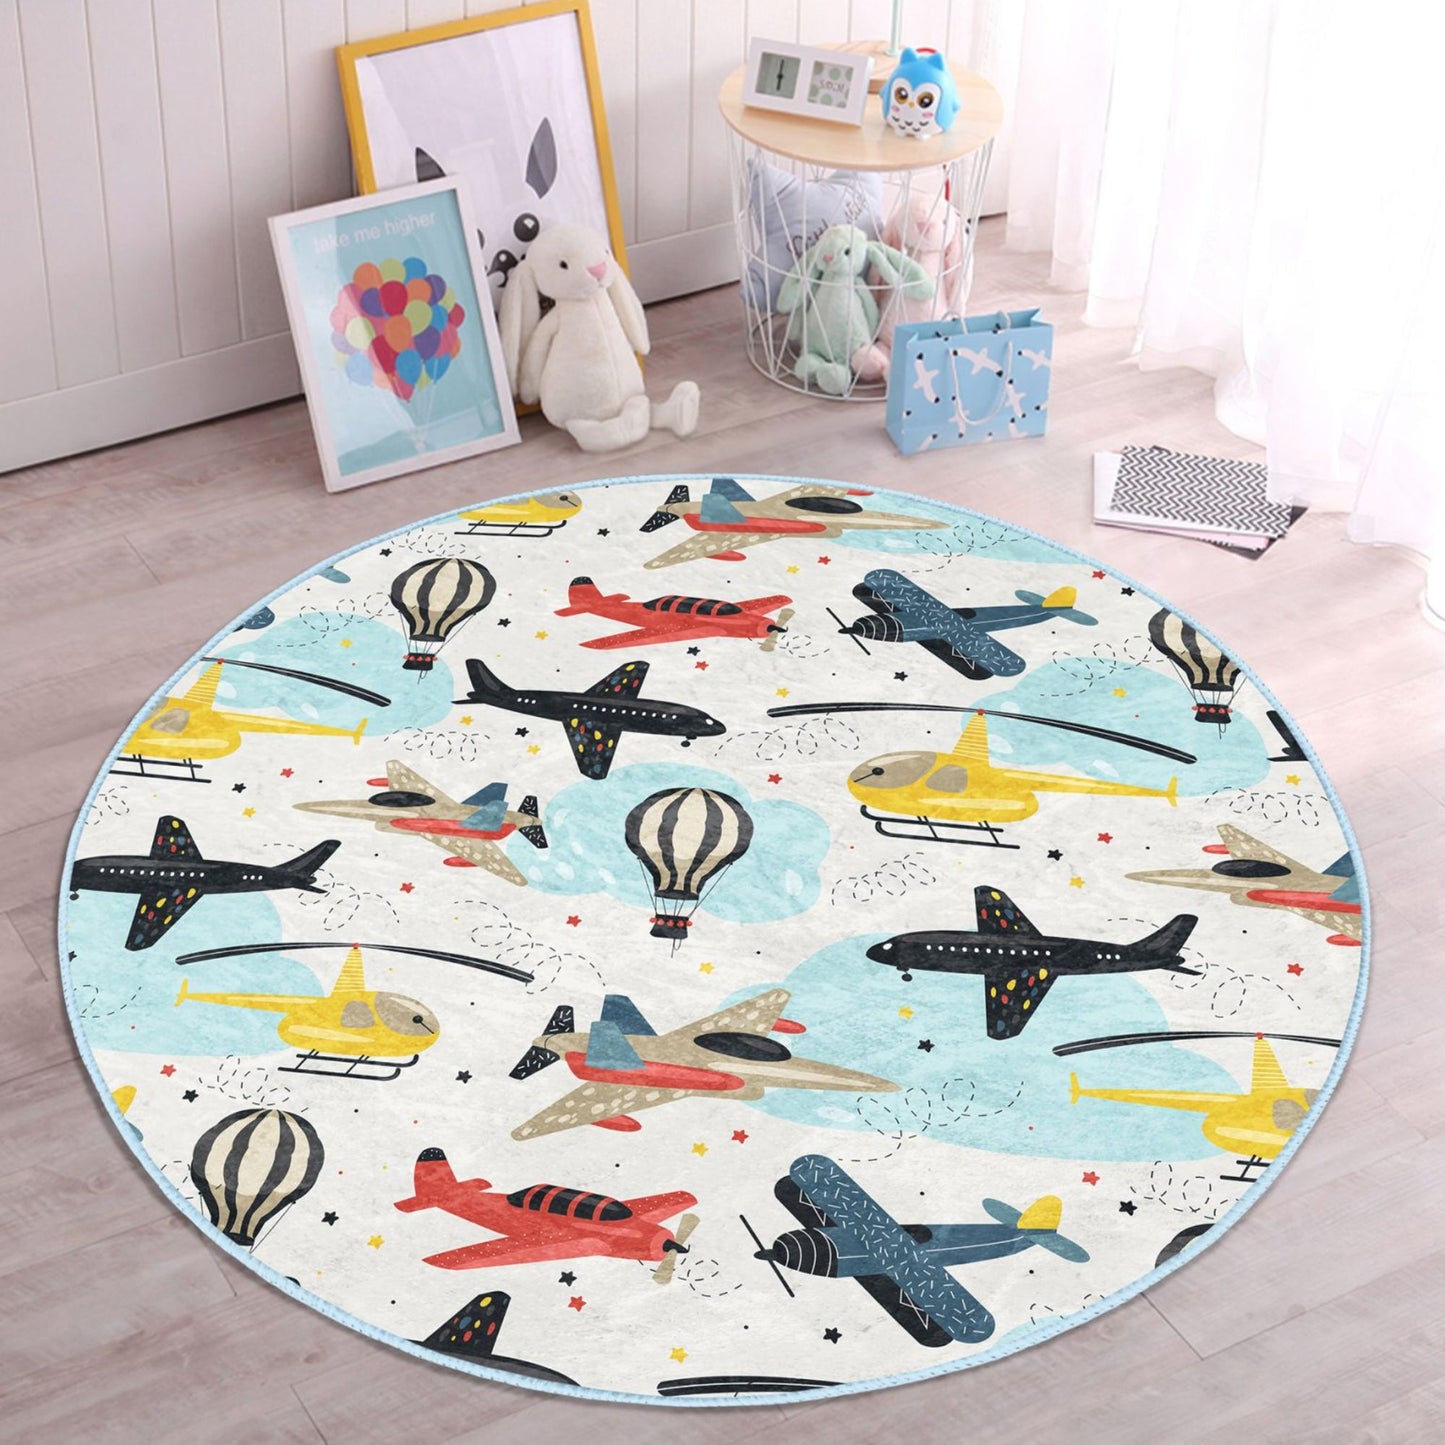 Planes Helicopters Printed Kids' Room Washable Rug